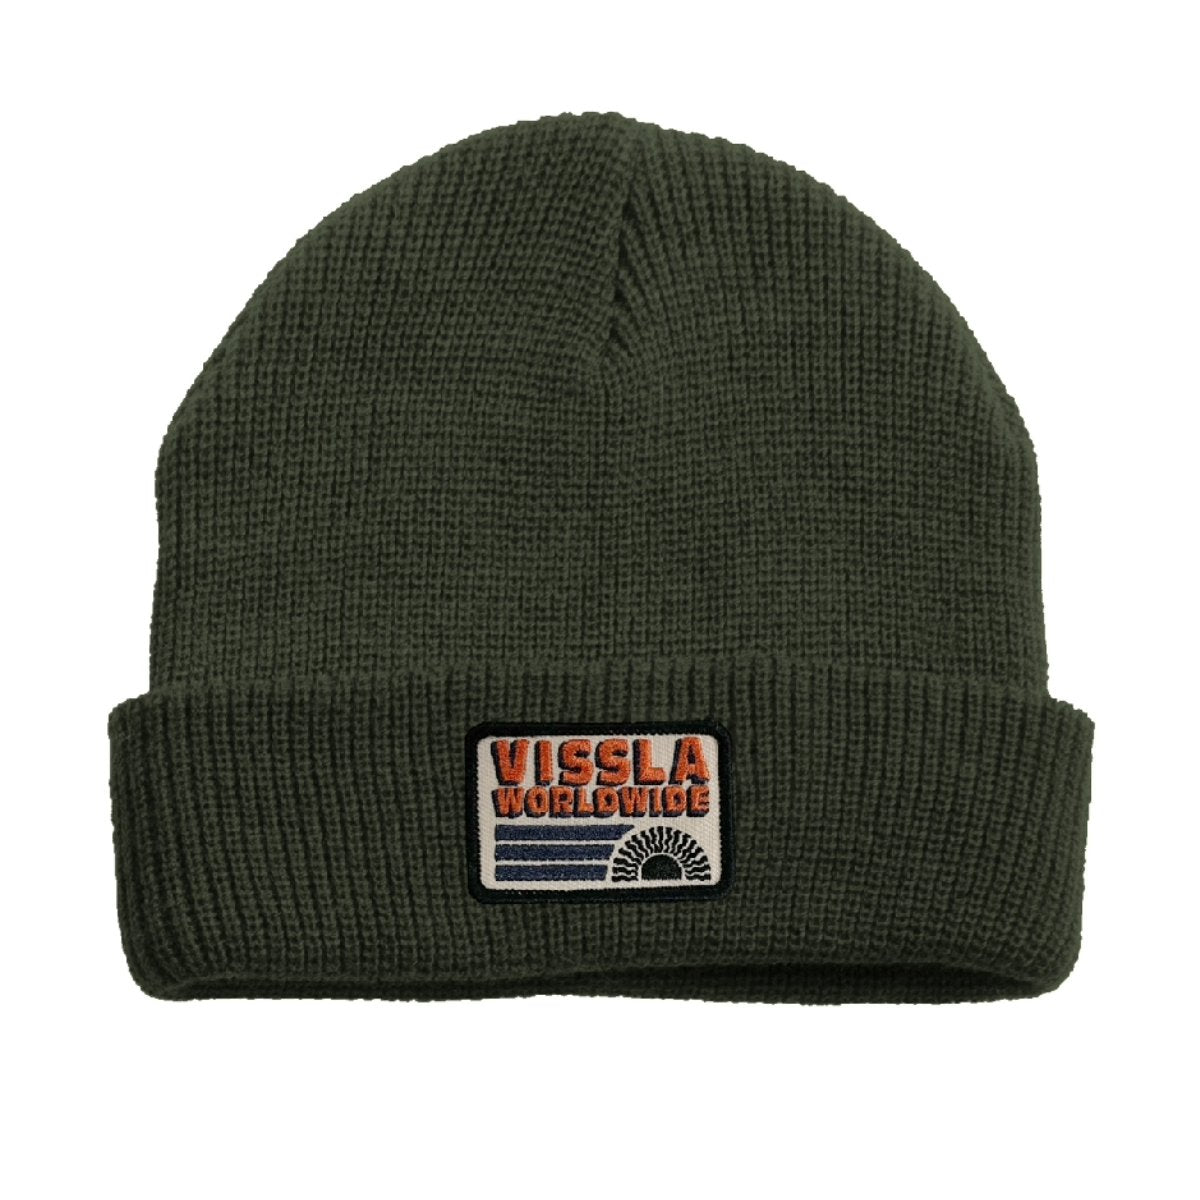 Vissla Solid Sets Eco Beanie in Army - BoardCo